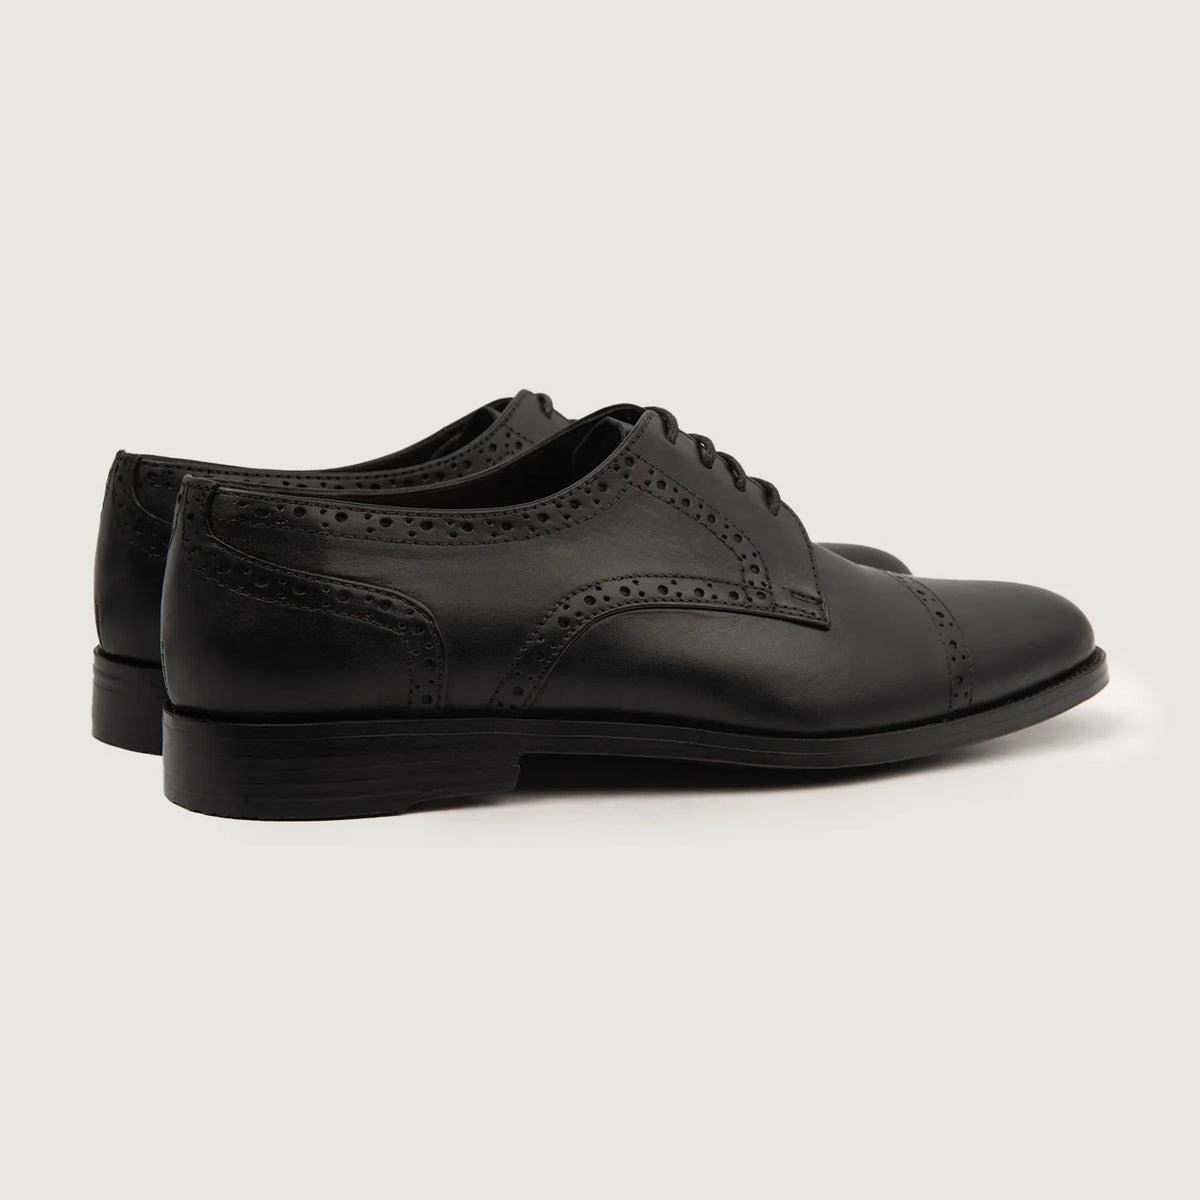 Dirk Brogues Derby Black Leather Shoes